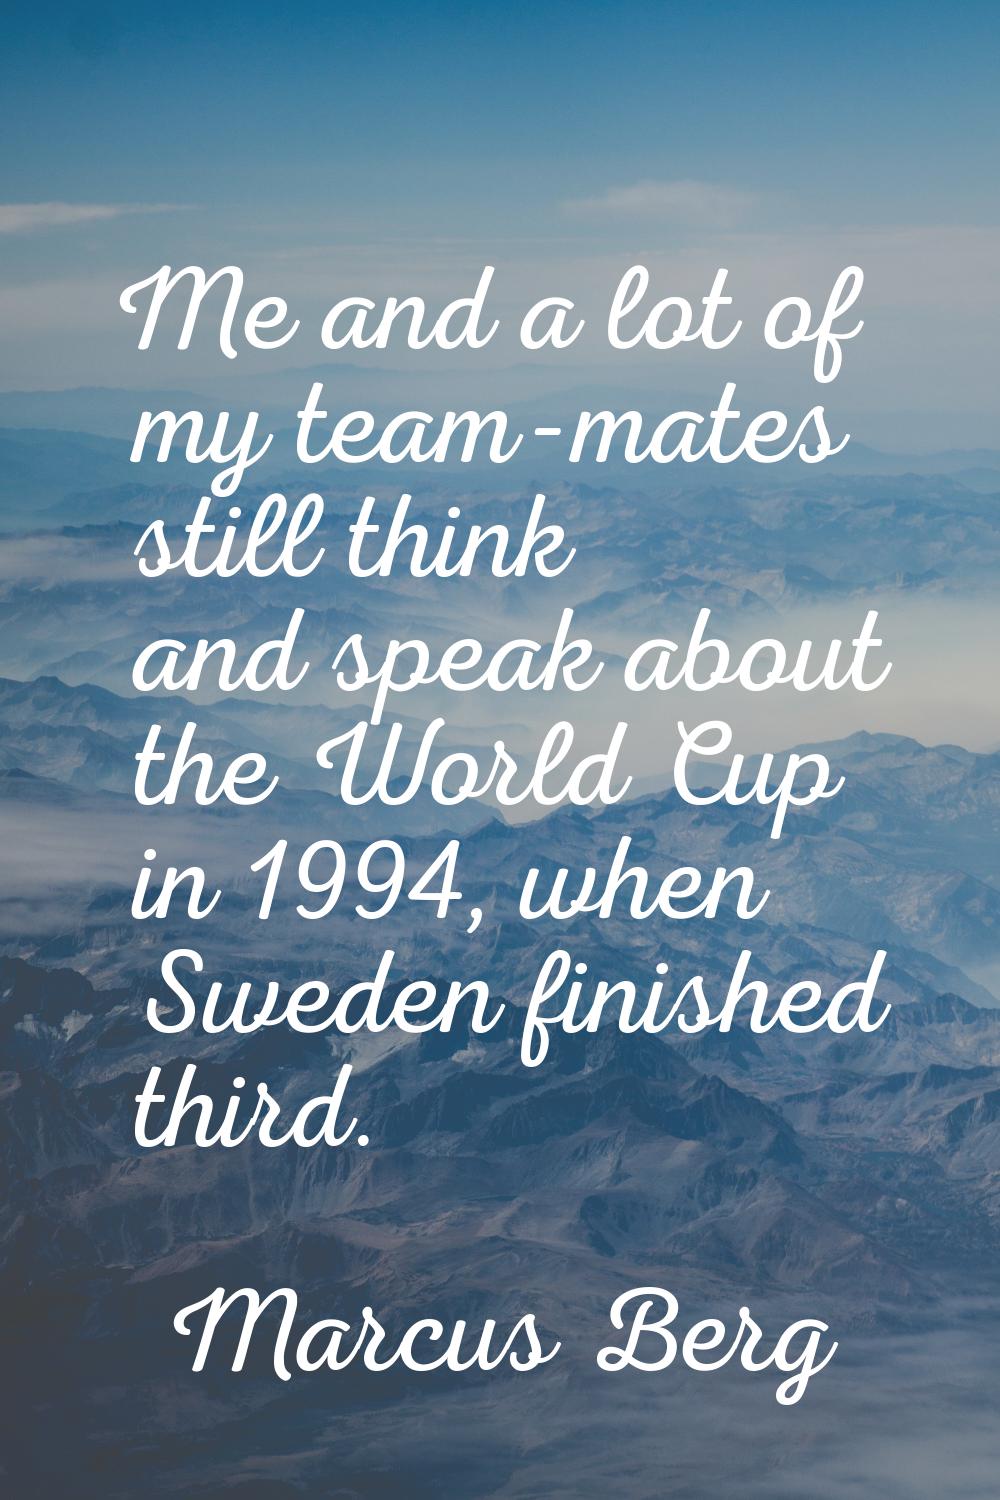 Me and a lot of my team-mates still think and speak about the World Cup in 1994, when Sweden finish